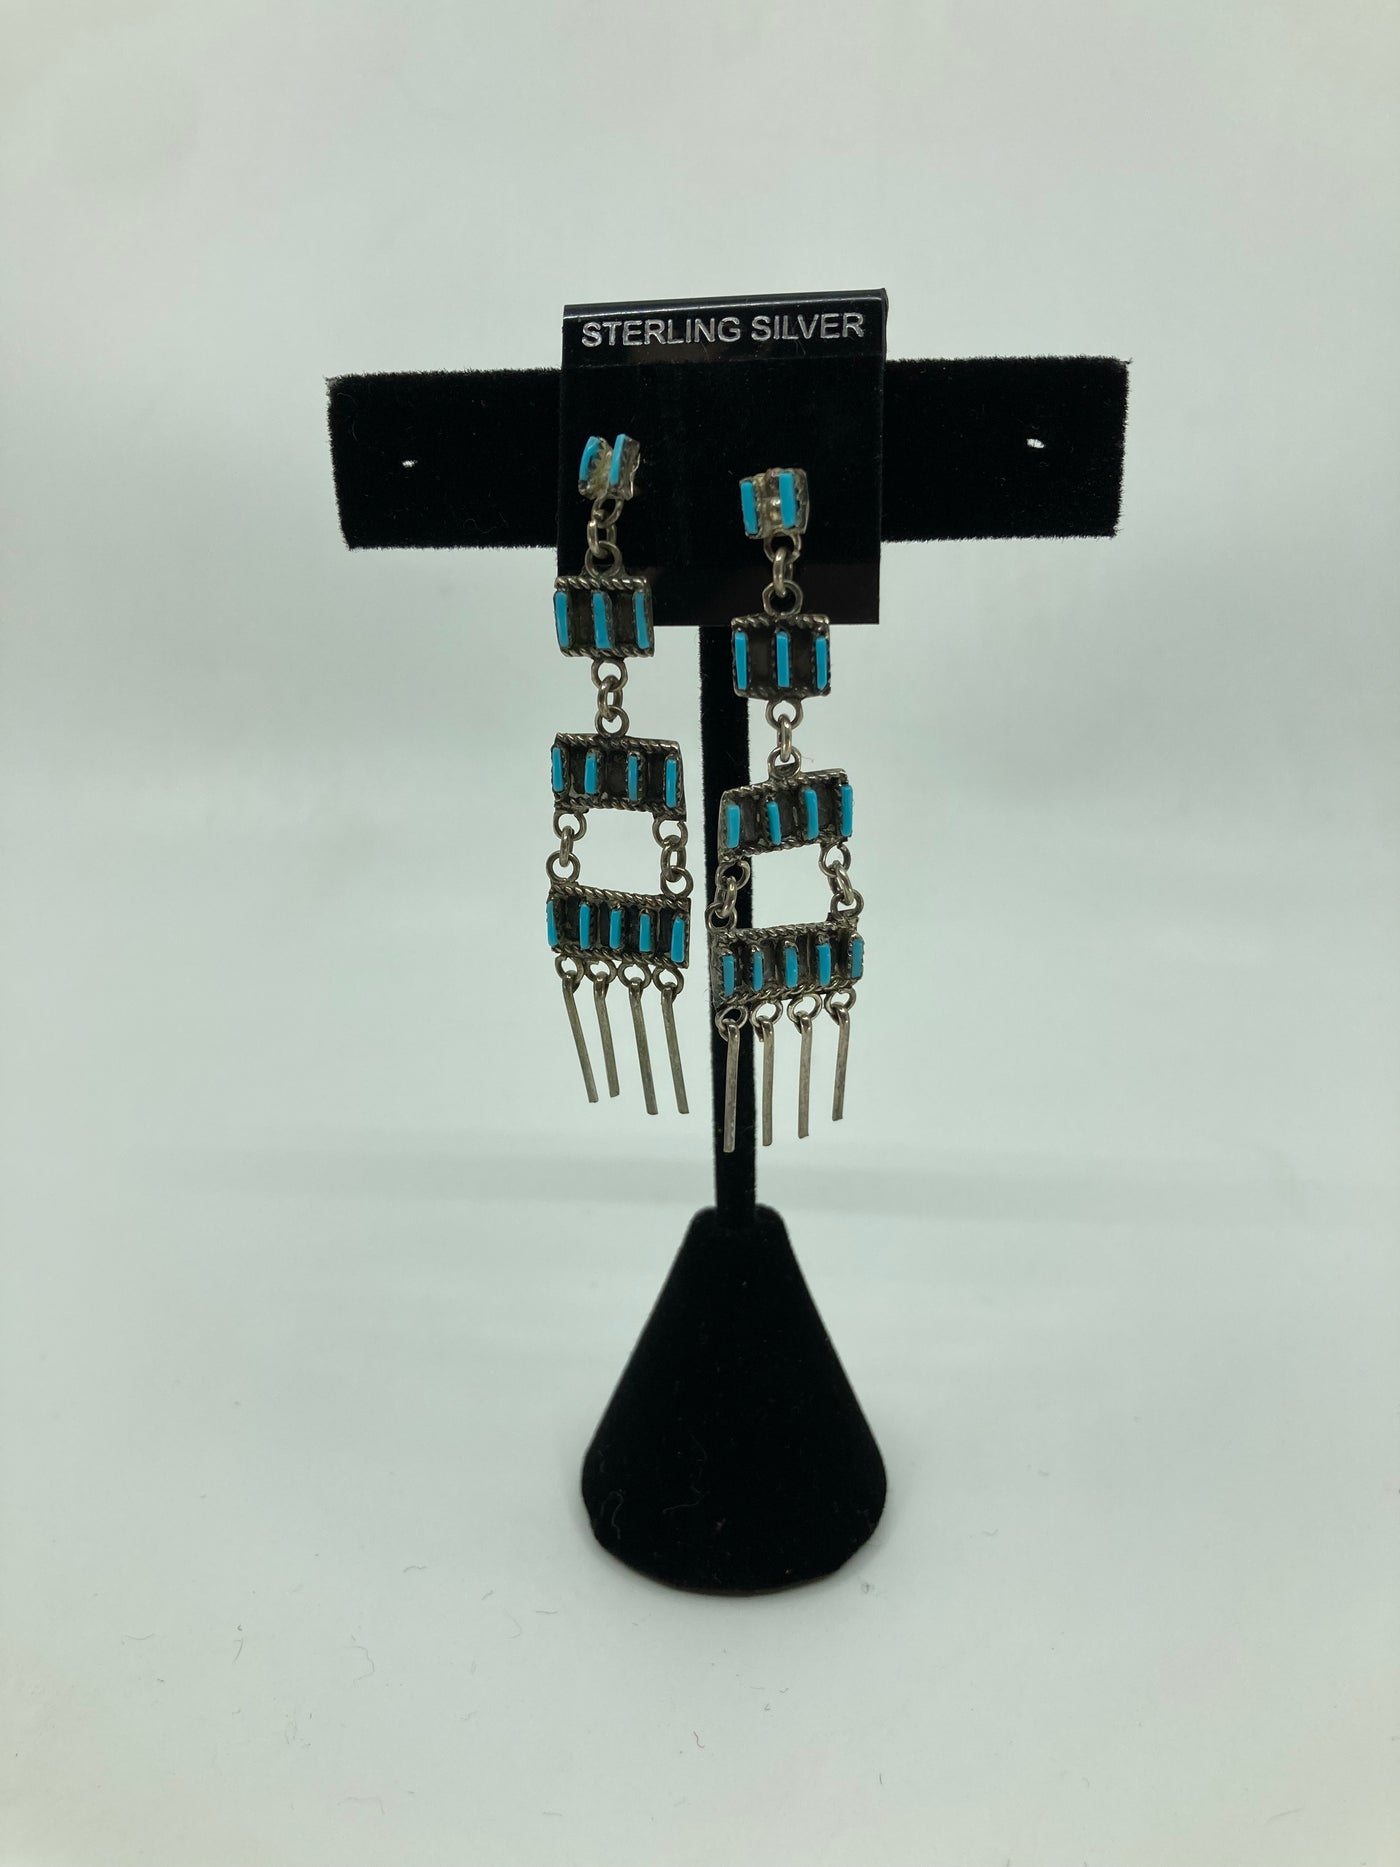 Handmade Sterling Silver and Turquoise Cascading Earrings PSTPE44